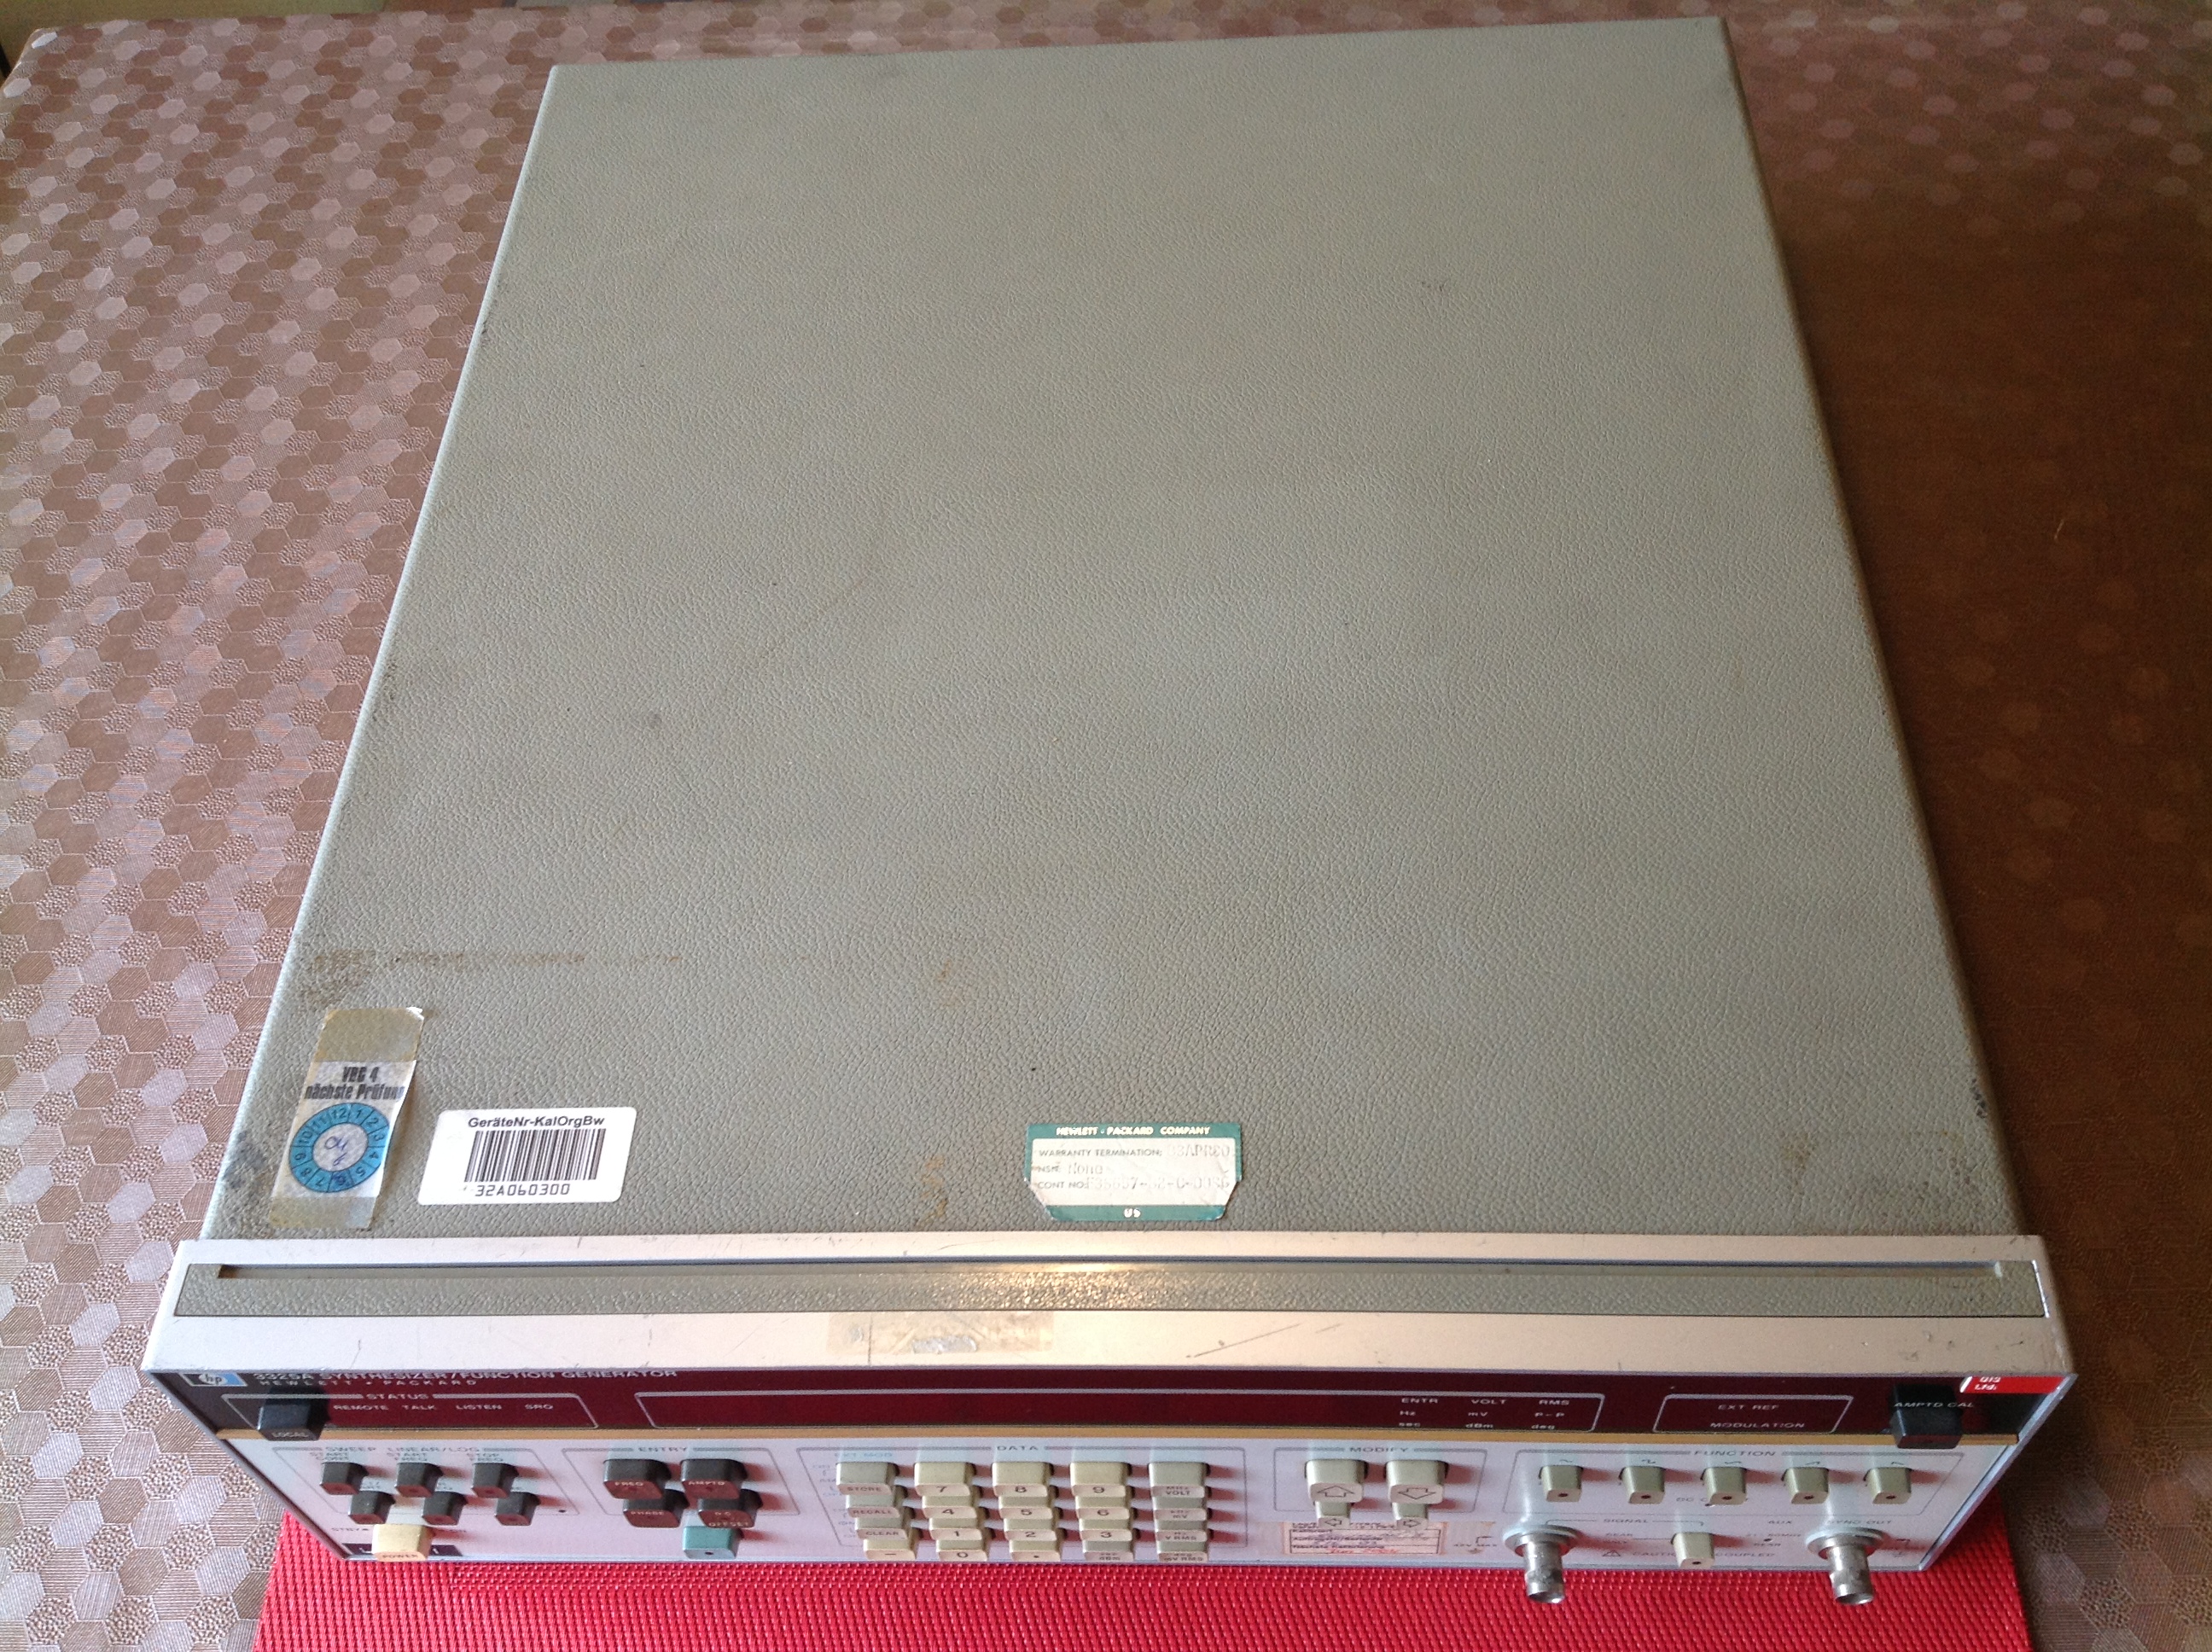 Hewlett Packard 3325A Synthesizer/Functions Generator